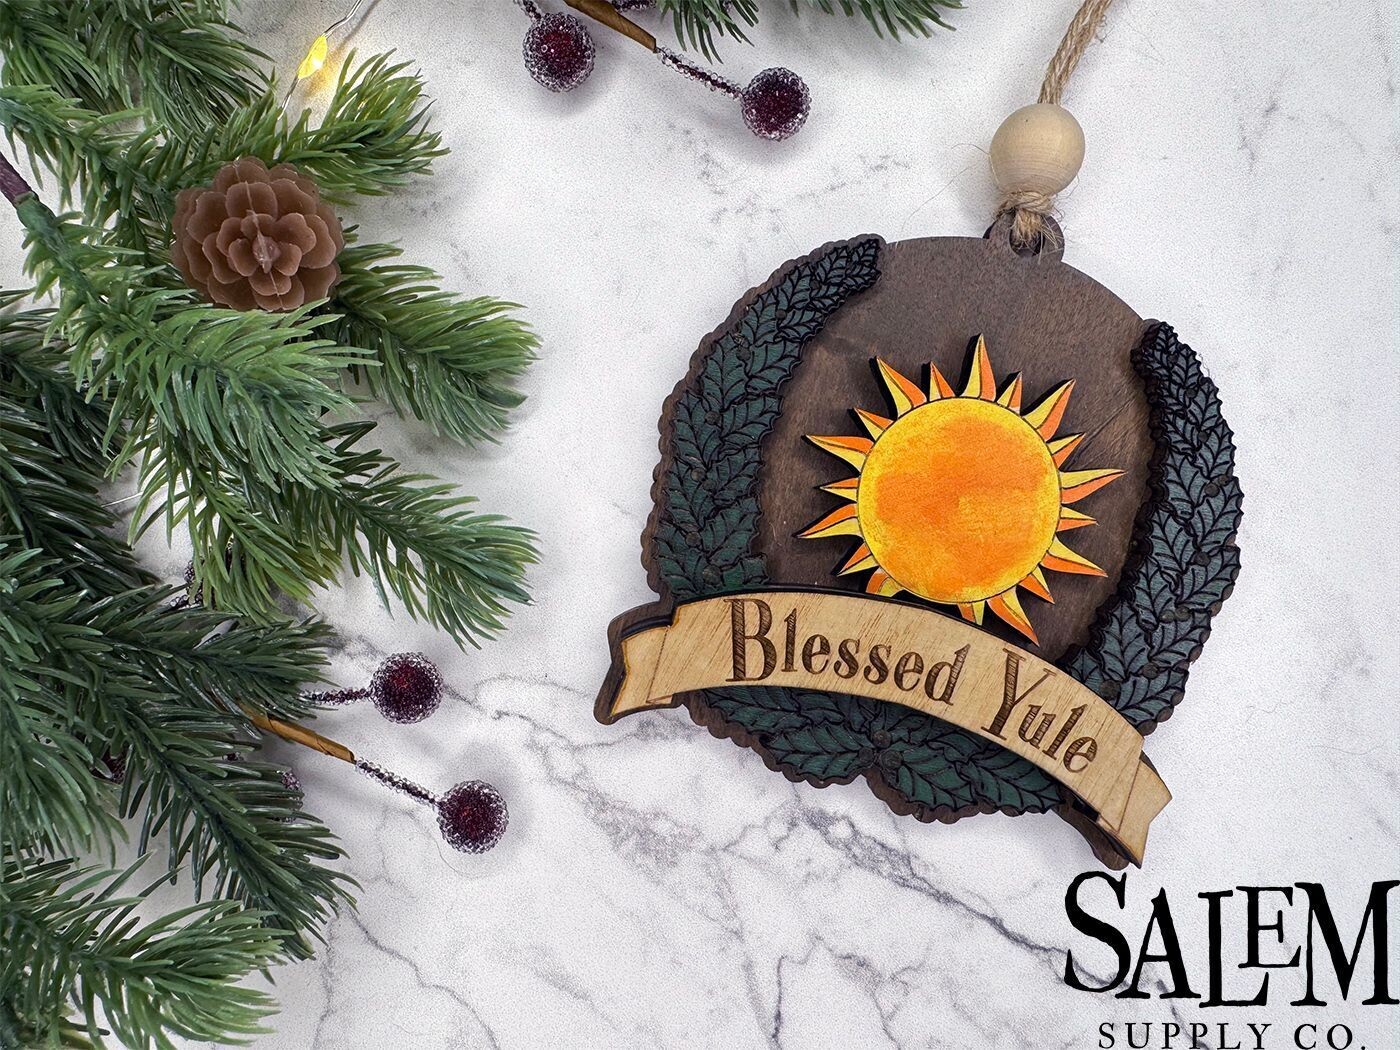 "Blessed Yule" Sun Wood Christmas Ornament